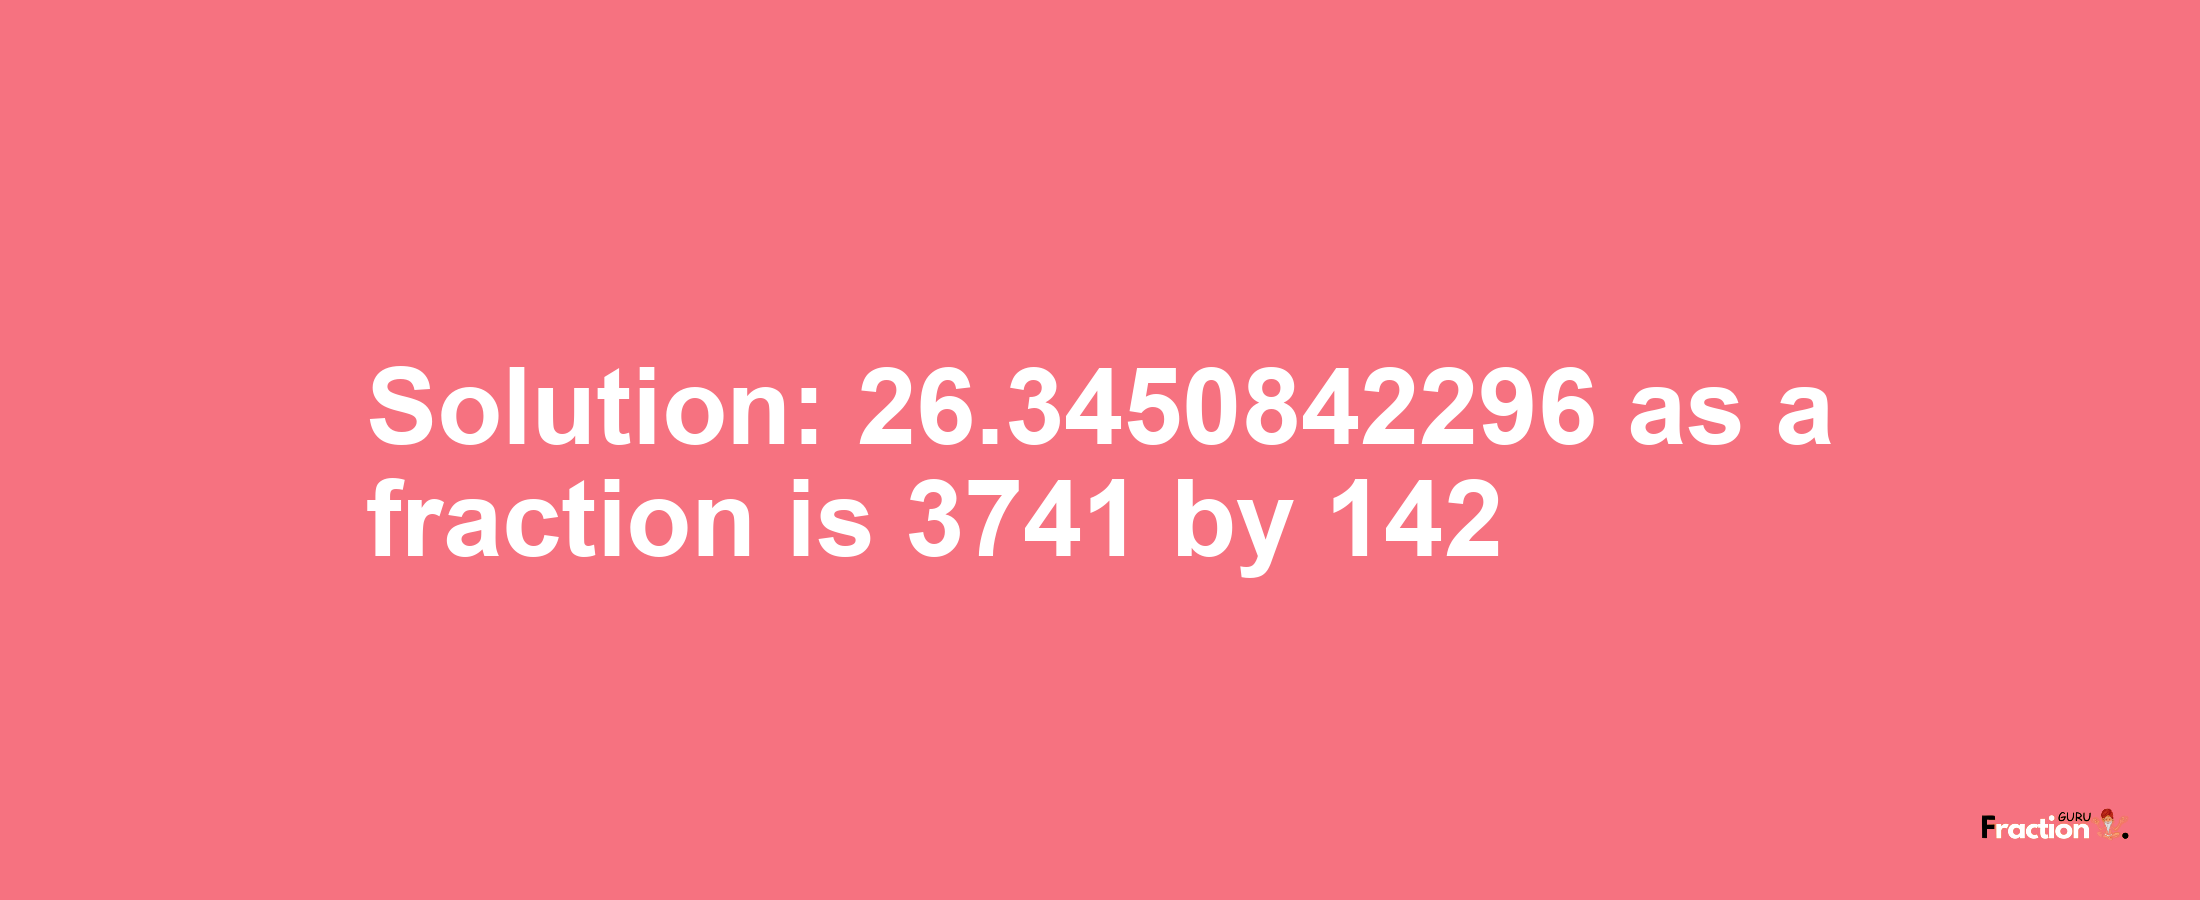 Solution:26.3450842296 as a fraction is 3741/142